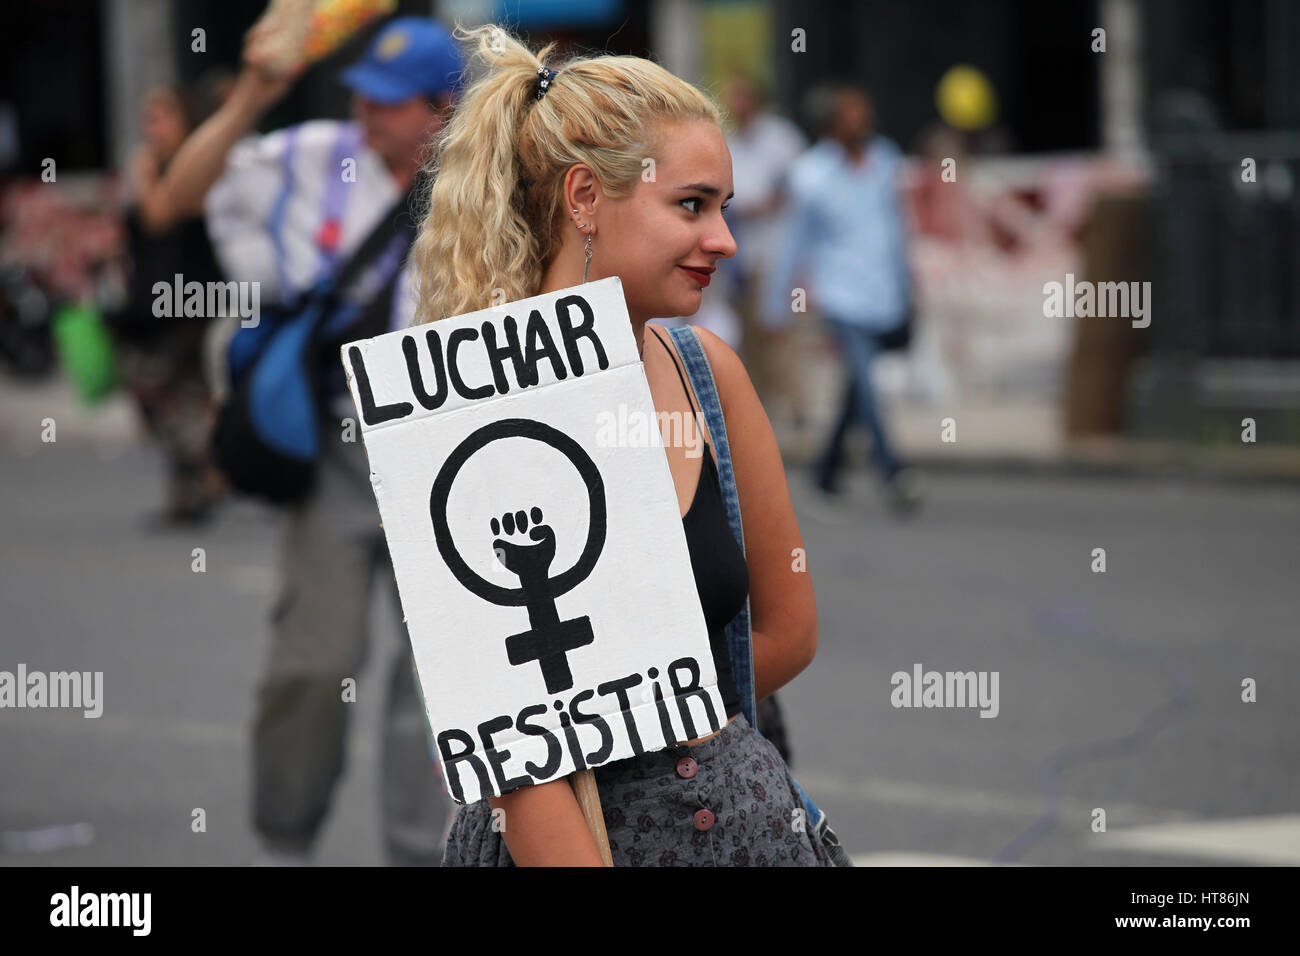 Buenos Aires, Argentina. 8th Mar, 2017. Gathering under the slogan Ni Una Menos hundreds of thousands of women across Argentina yesterday protested against gender violence and femicide in mass rallies across many cities, including Buenos Aires City, marching from the Congreso (Parliament) to the Plaza de Mayo. Credit: Claudio Santisteban/ZUMA Wire/Alamy Live News Stock Photo